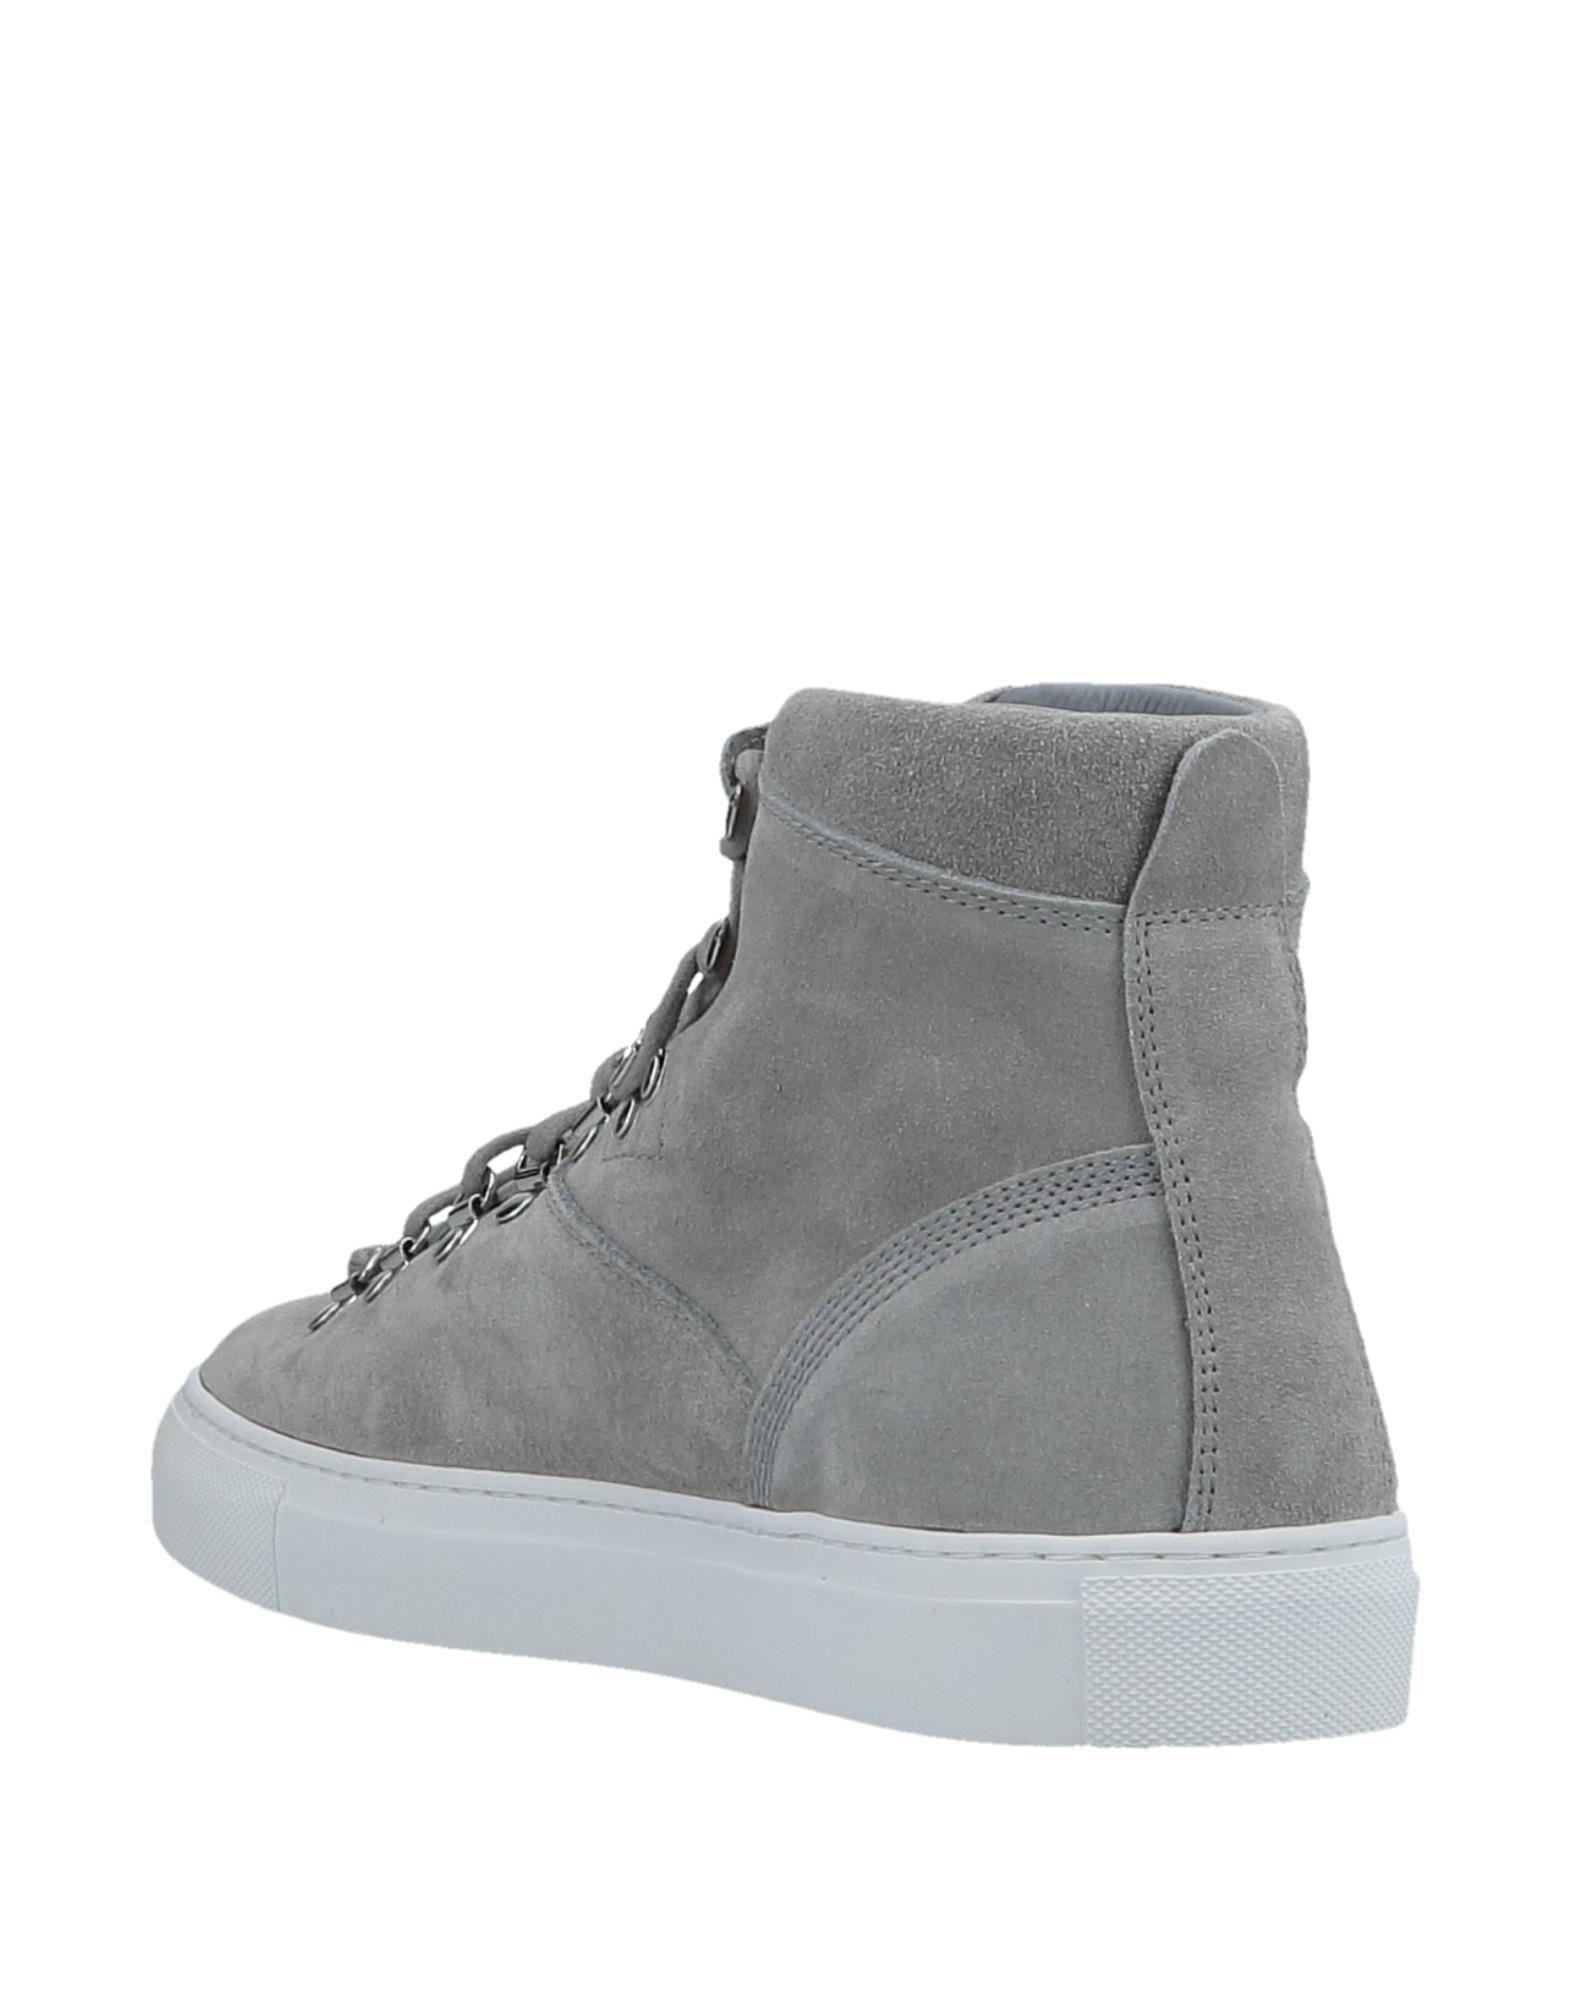 Diemme Leather High-tops & Sneakers in Light Grey (Gray) for Men - Lyst